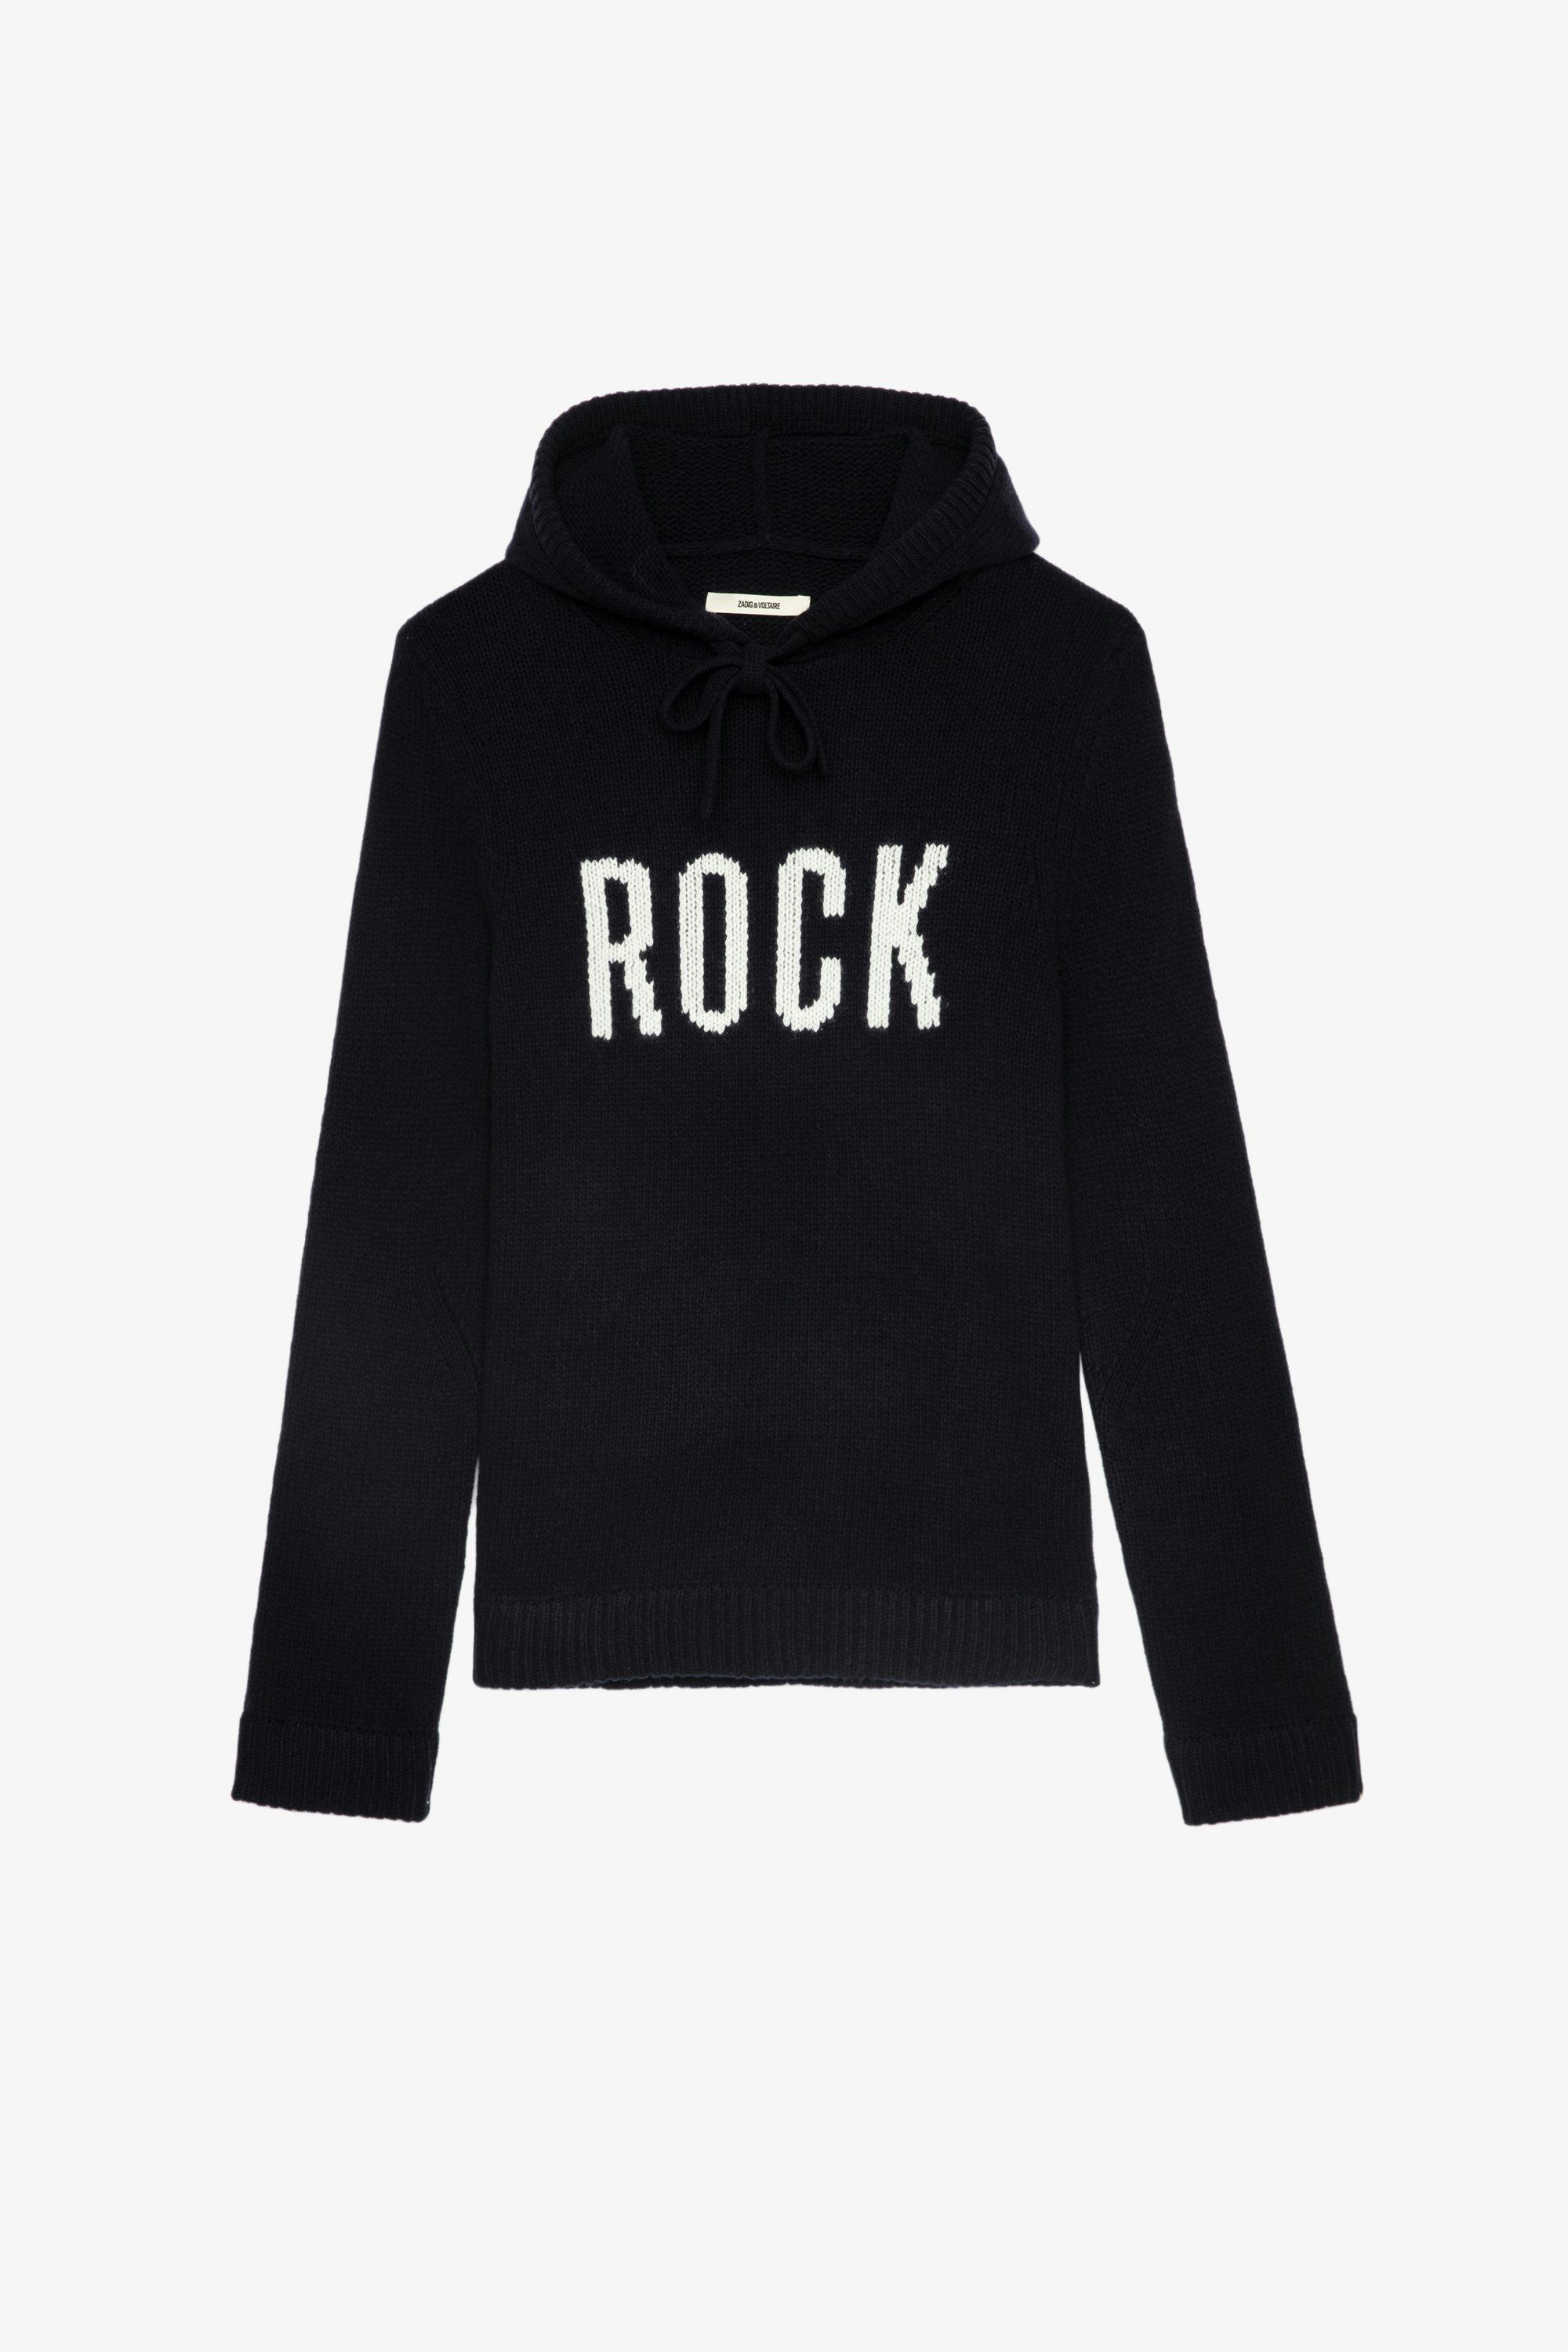 Clay Sweater Men’s hooded sweater in navy-blue knit with contrasting “Rock” slogan